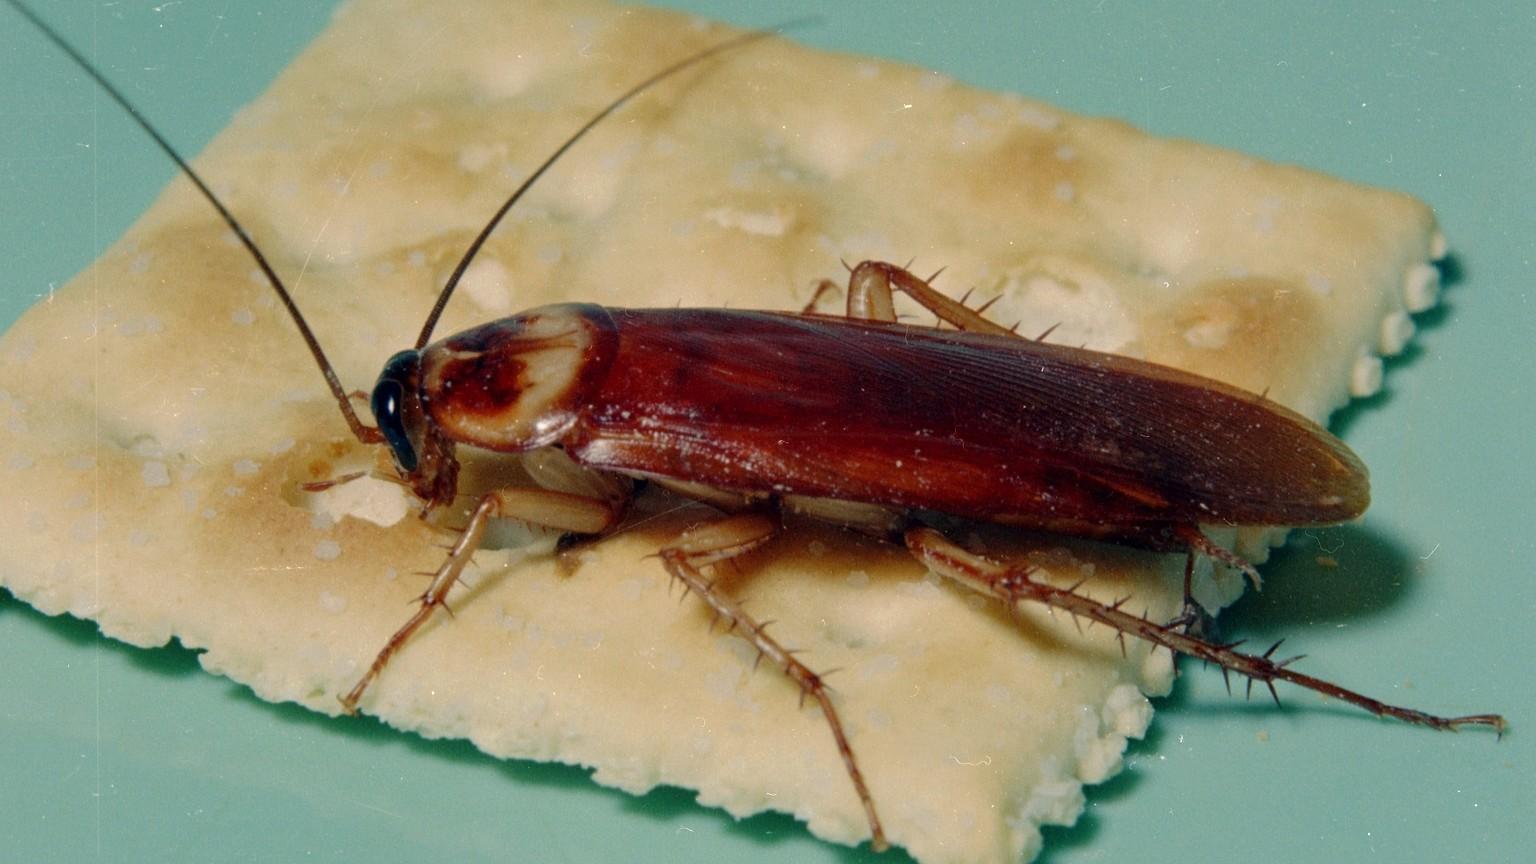 American cockroach sitting on a cracker